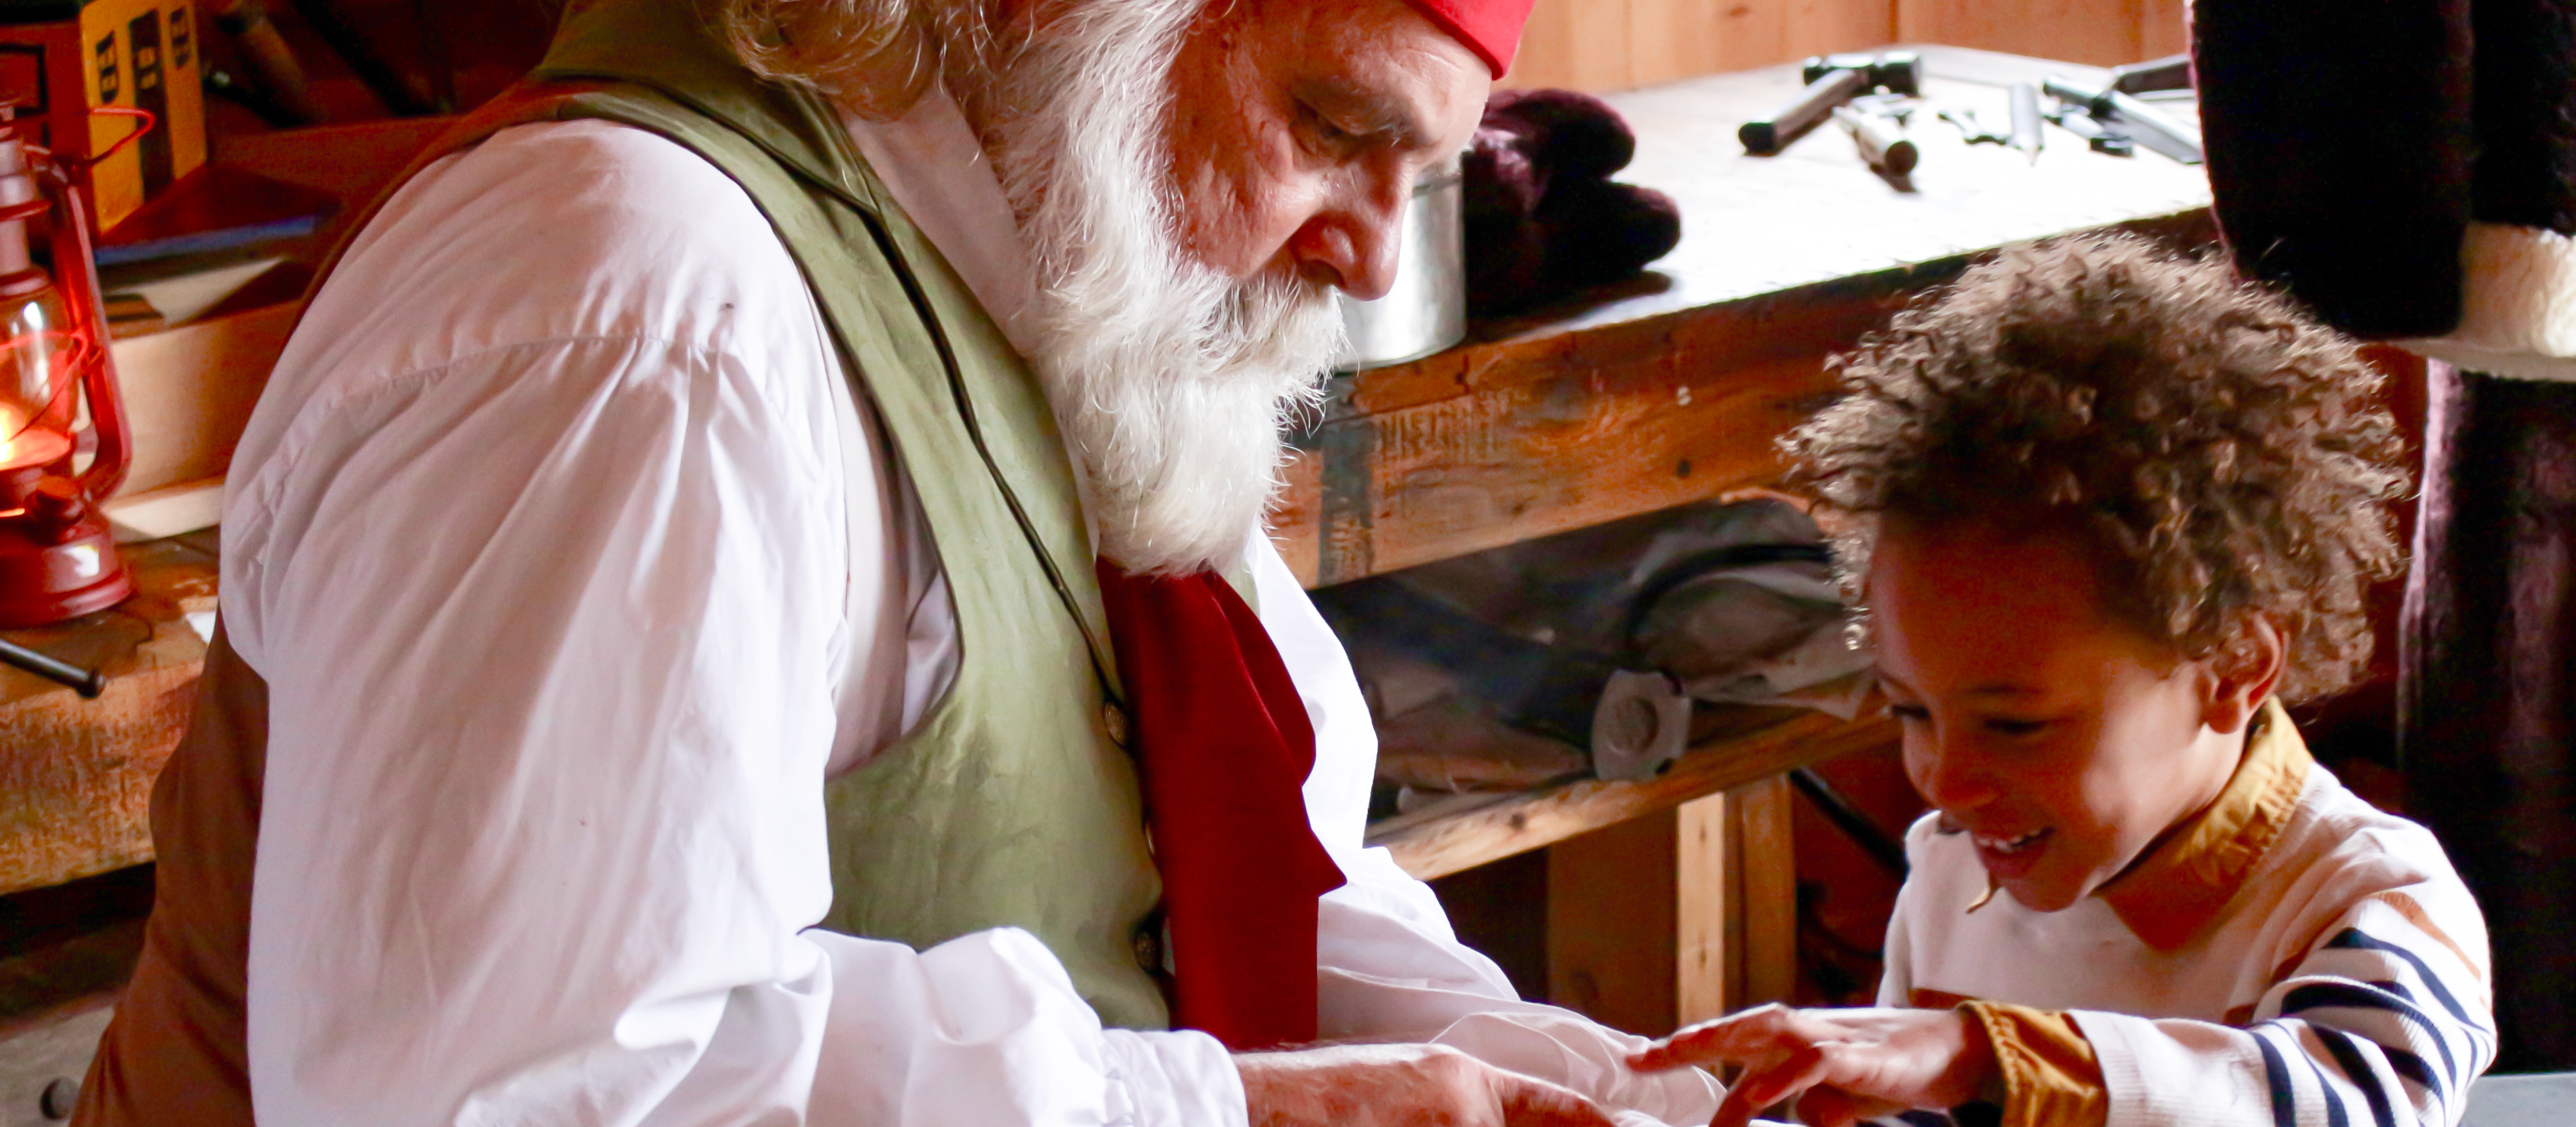 An image of a man, with a white beard, wearing a white collared shirt with a green vest and wearing a red hat, dressed up as Santa looking at something with a young boy.